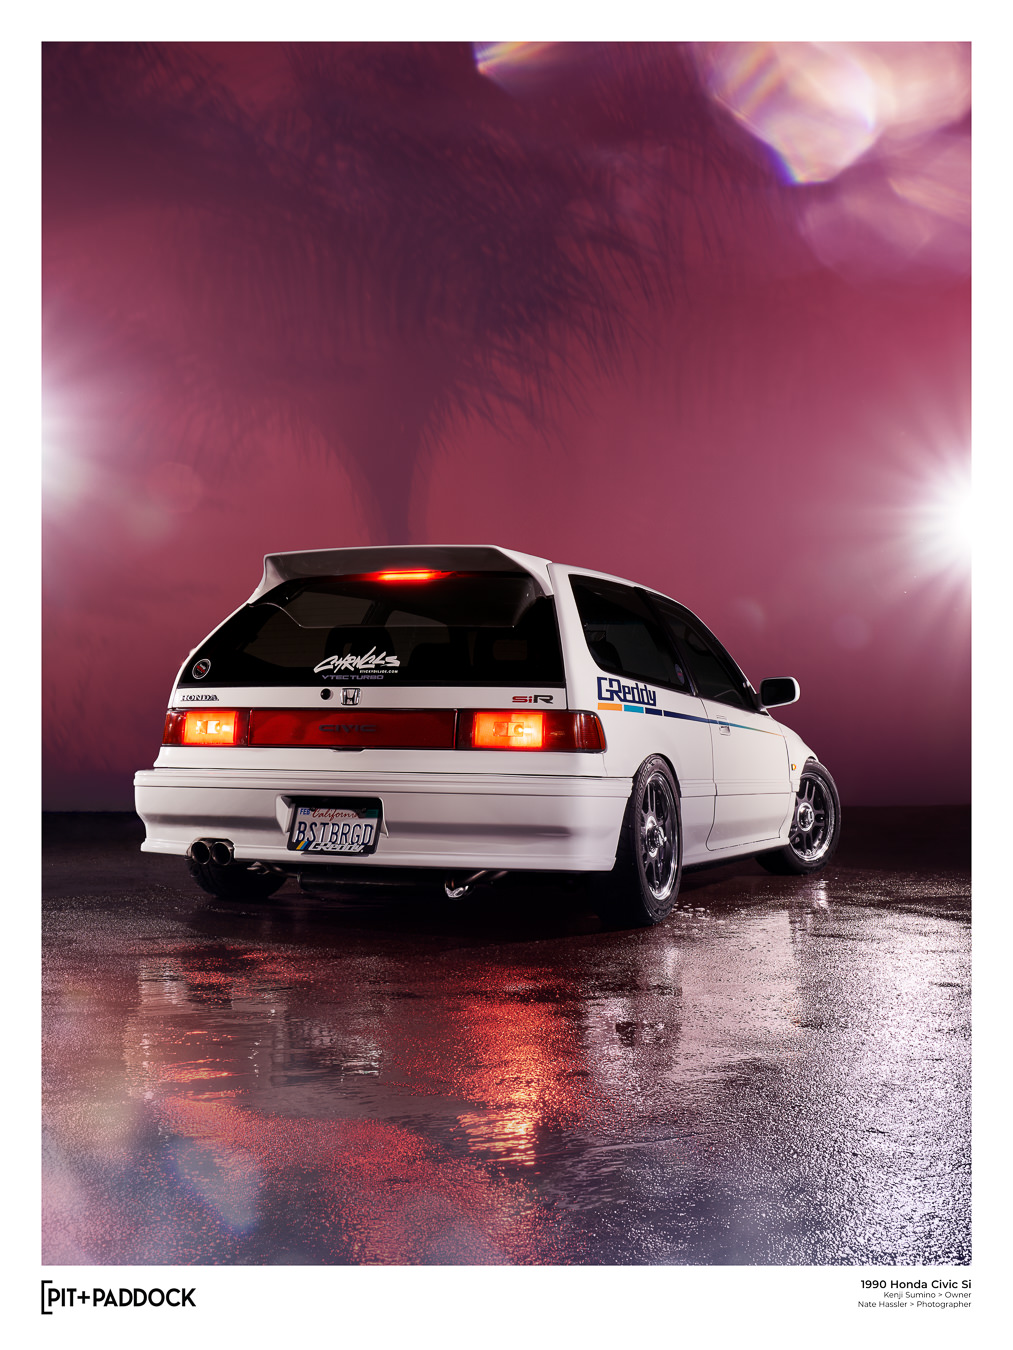 300hp Turbo EF Honda Civic Lights Up the Night for Pit+Paddock Poster Shoot